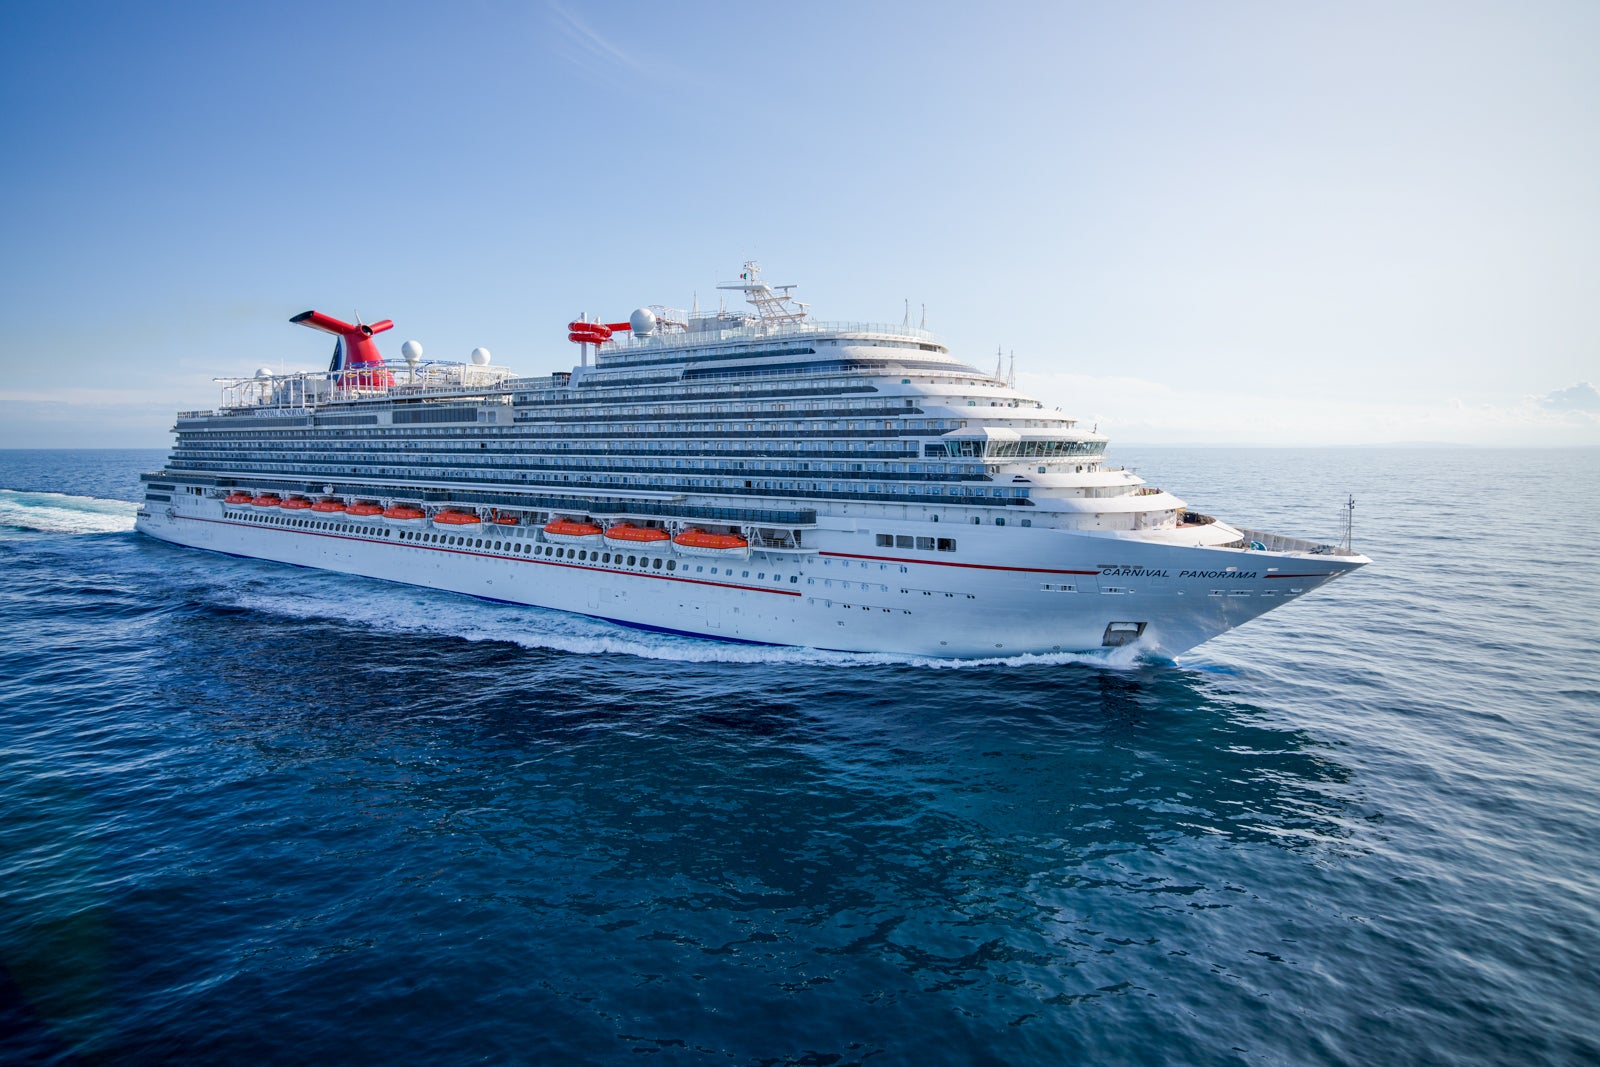 Dufry to sail duty free on Carnival Panorama